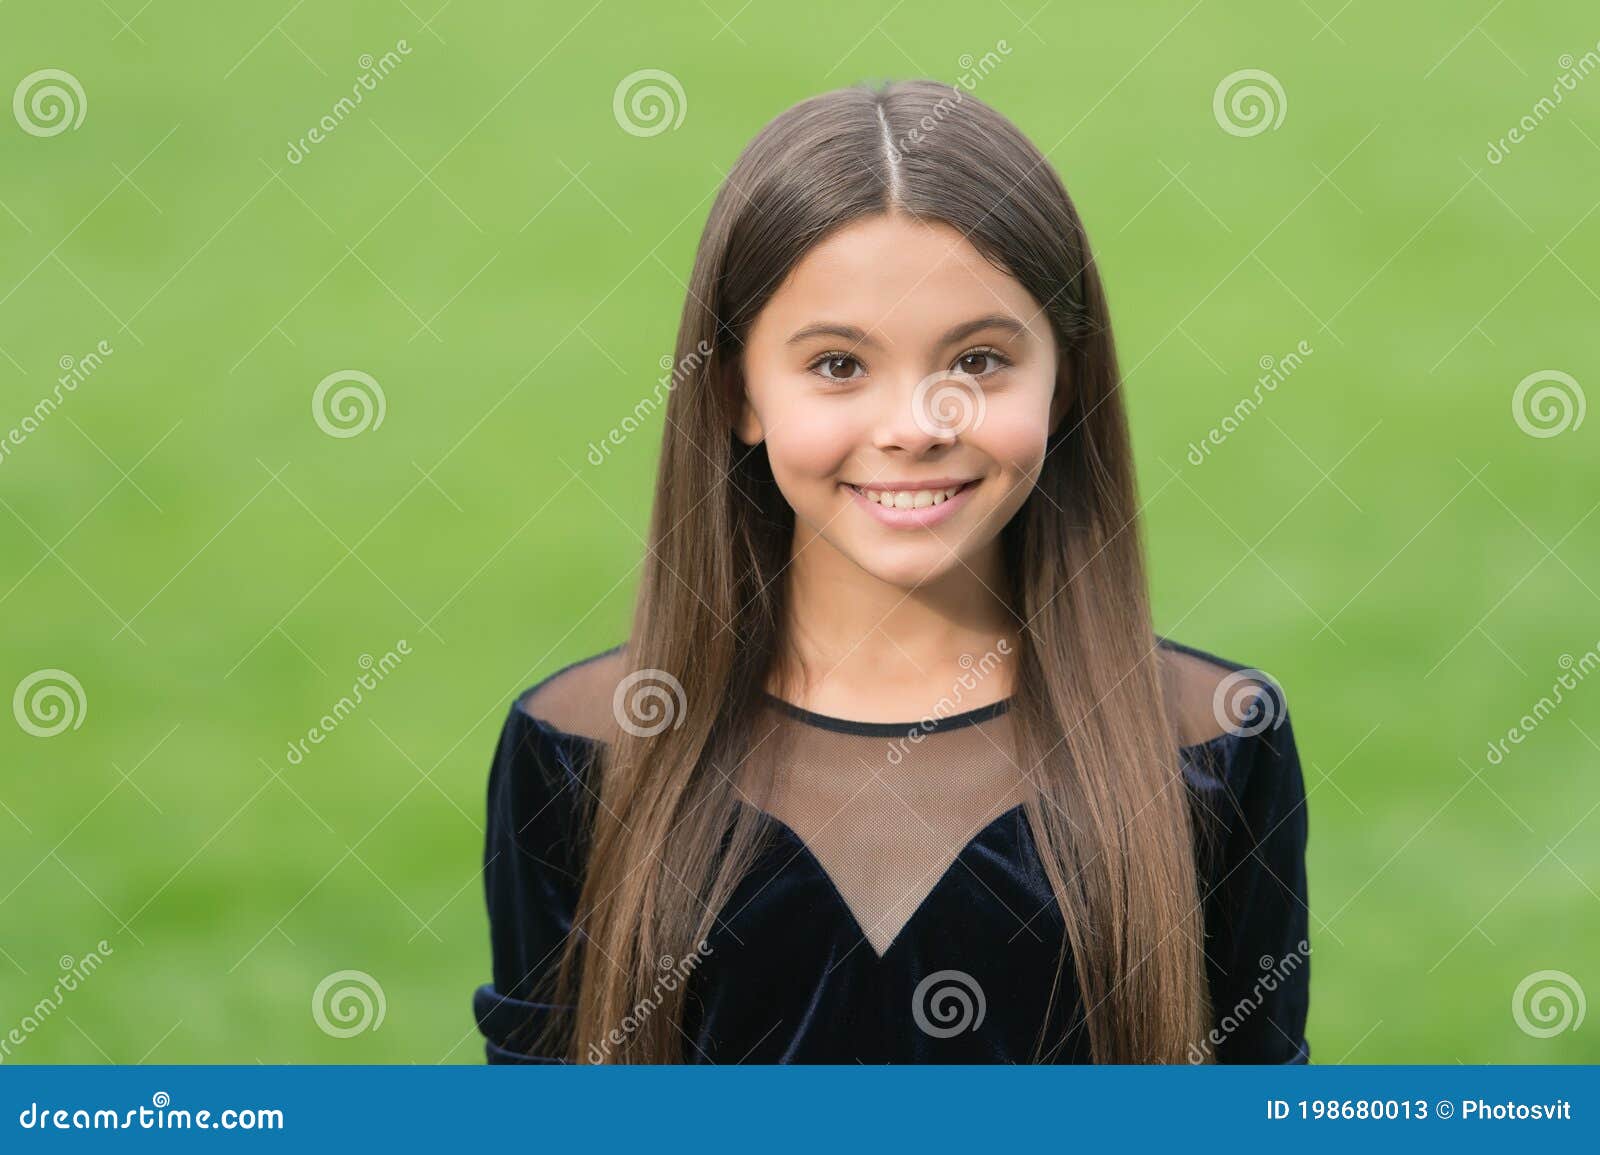 Be Great Every Day. Happy Child Smile Green Grass. Beauty Look of Cute Girl  Child. Hair Salon Stock Image - Image of green, grass: 198680013